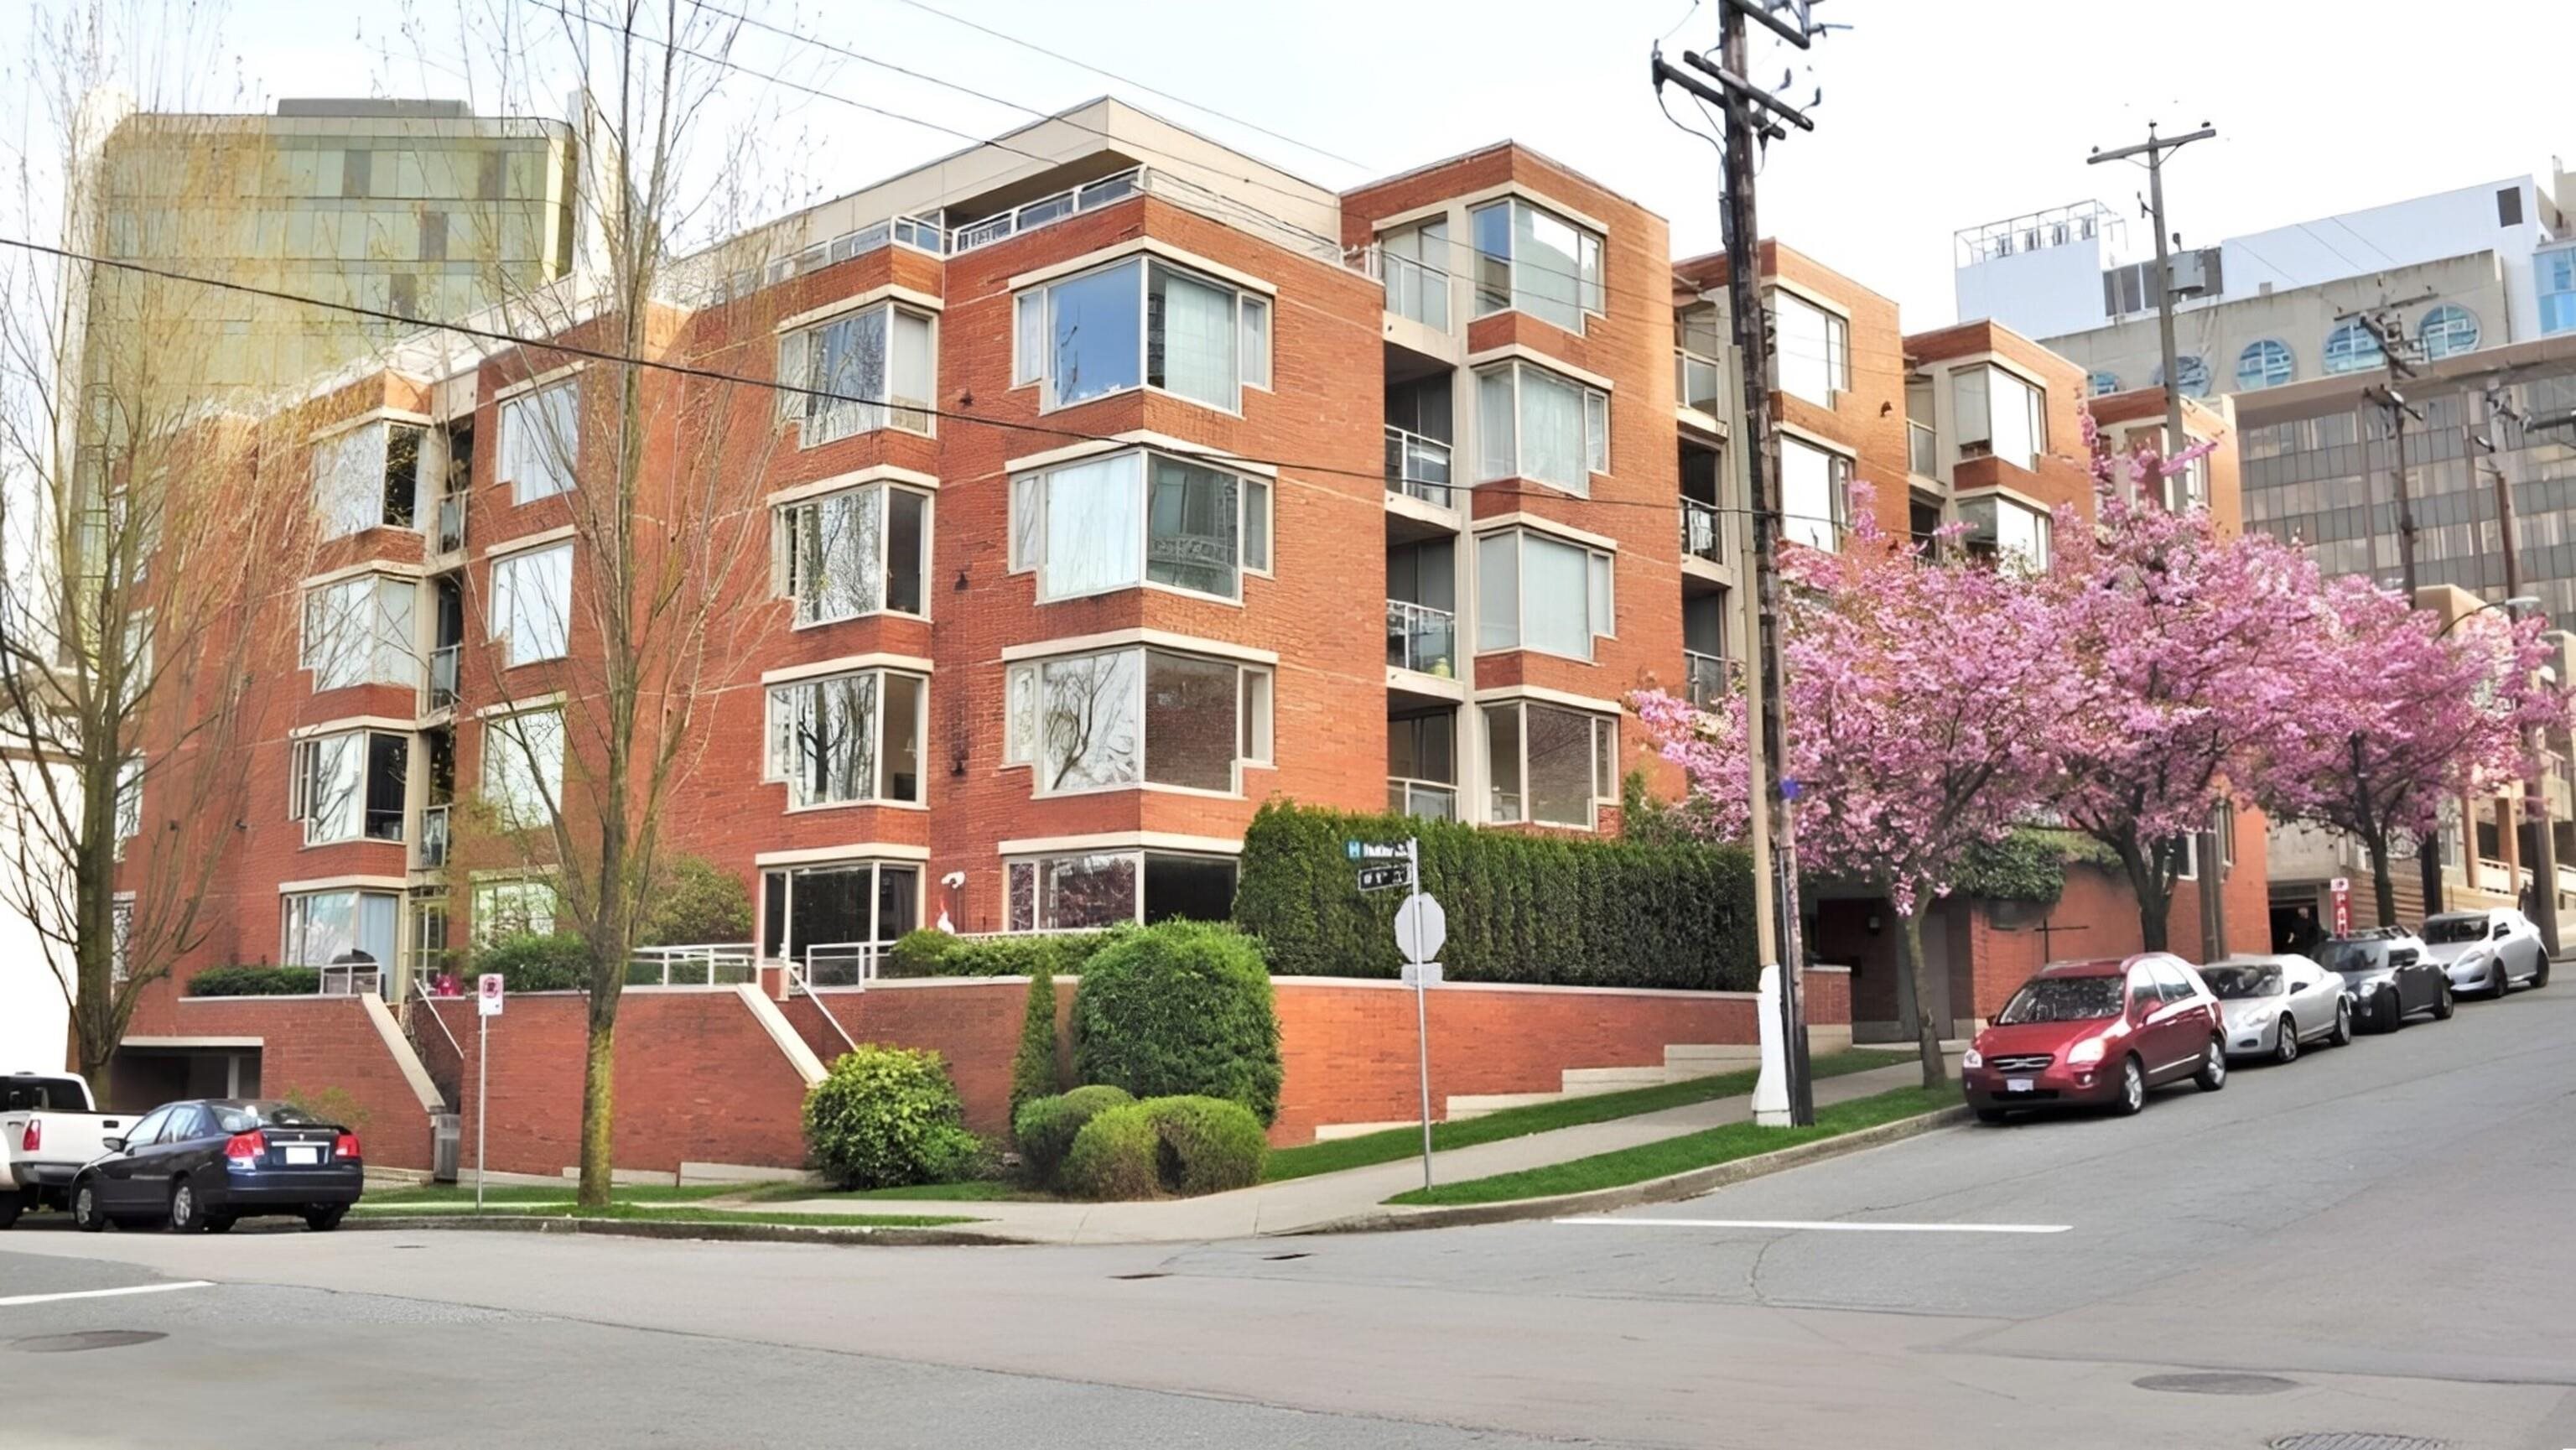 Fairview VW Apartment/Condo for sale:  2 bedroom 1,007 sq.ft. (Listed 2106-02-06)